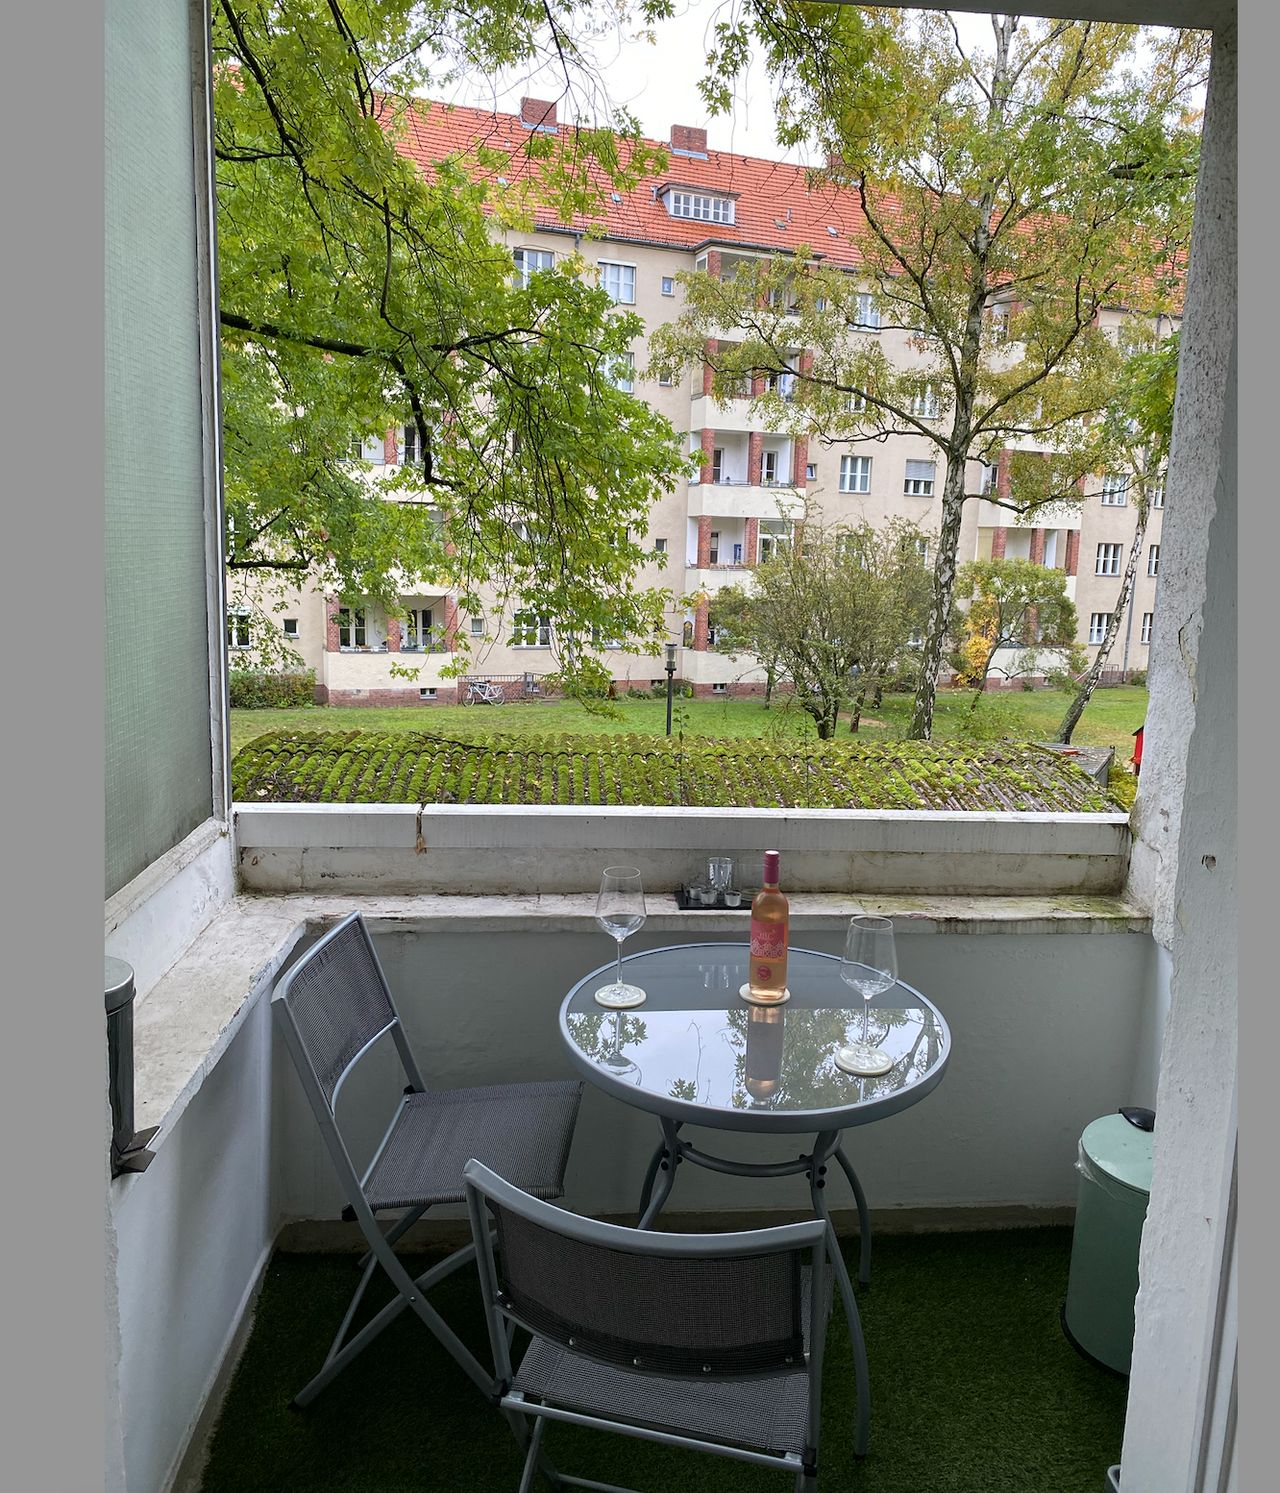 Attractive 2-room apartment in the heart of Berlin.